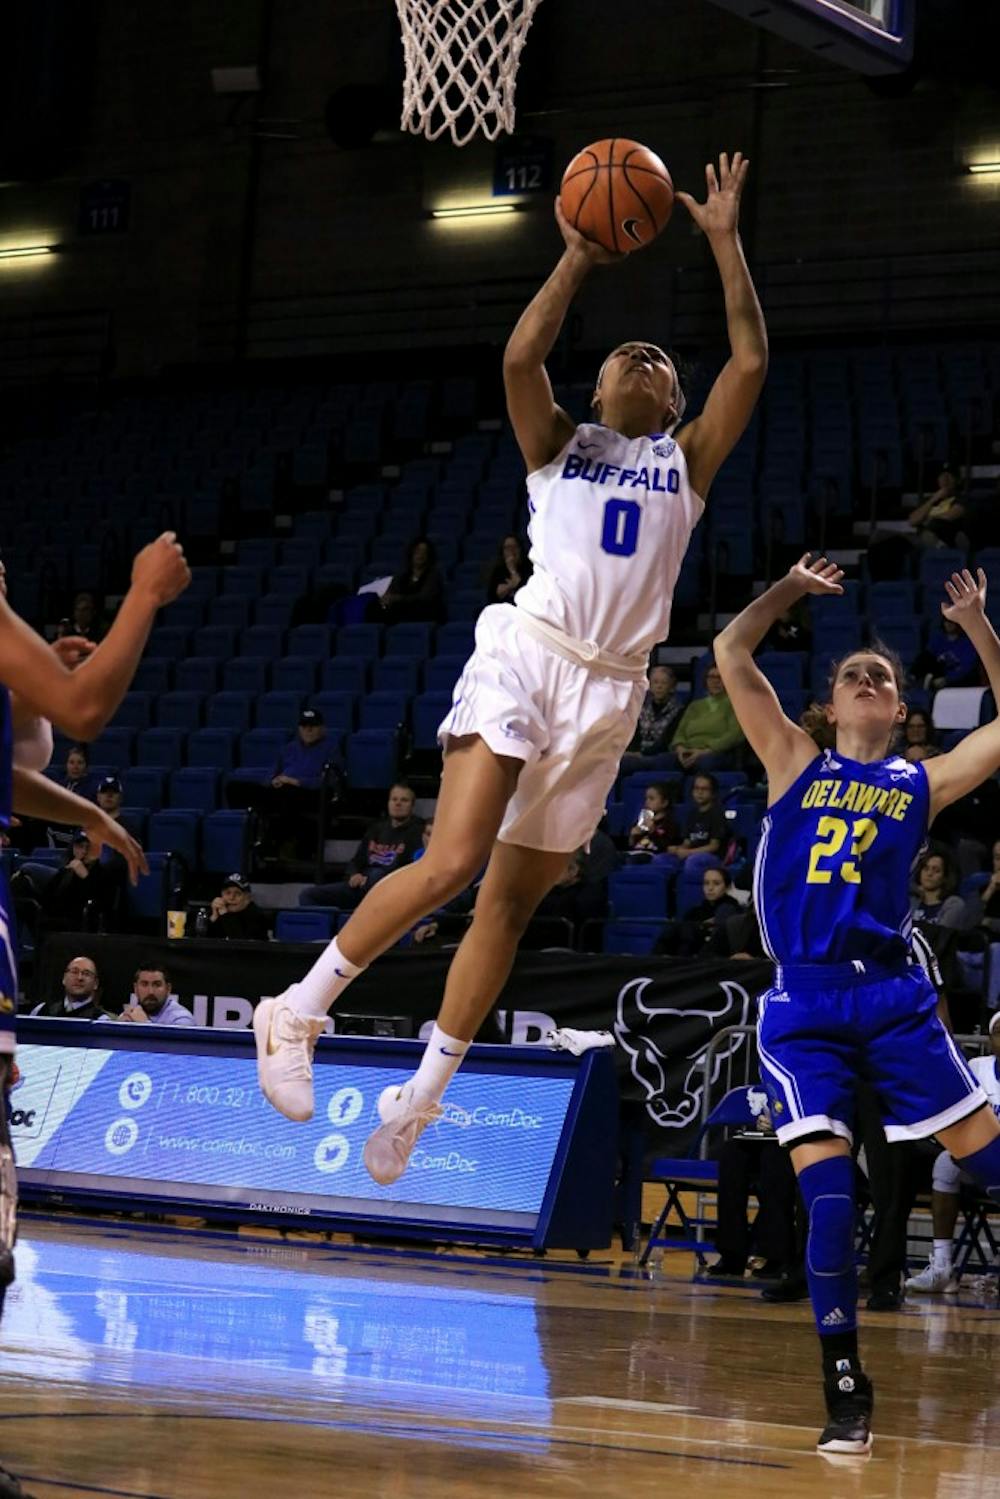 <p>Sophomore forward Summer Hemphill in action at Alumni Arena. Hemphill is considered one of the Bulls' top players who has potential to grow even more at UB.</p>